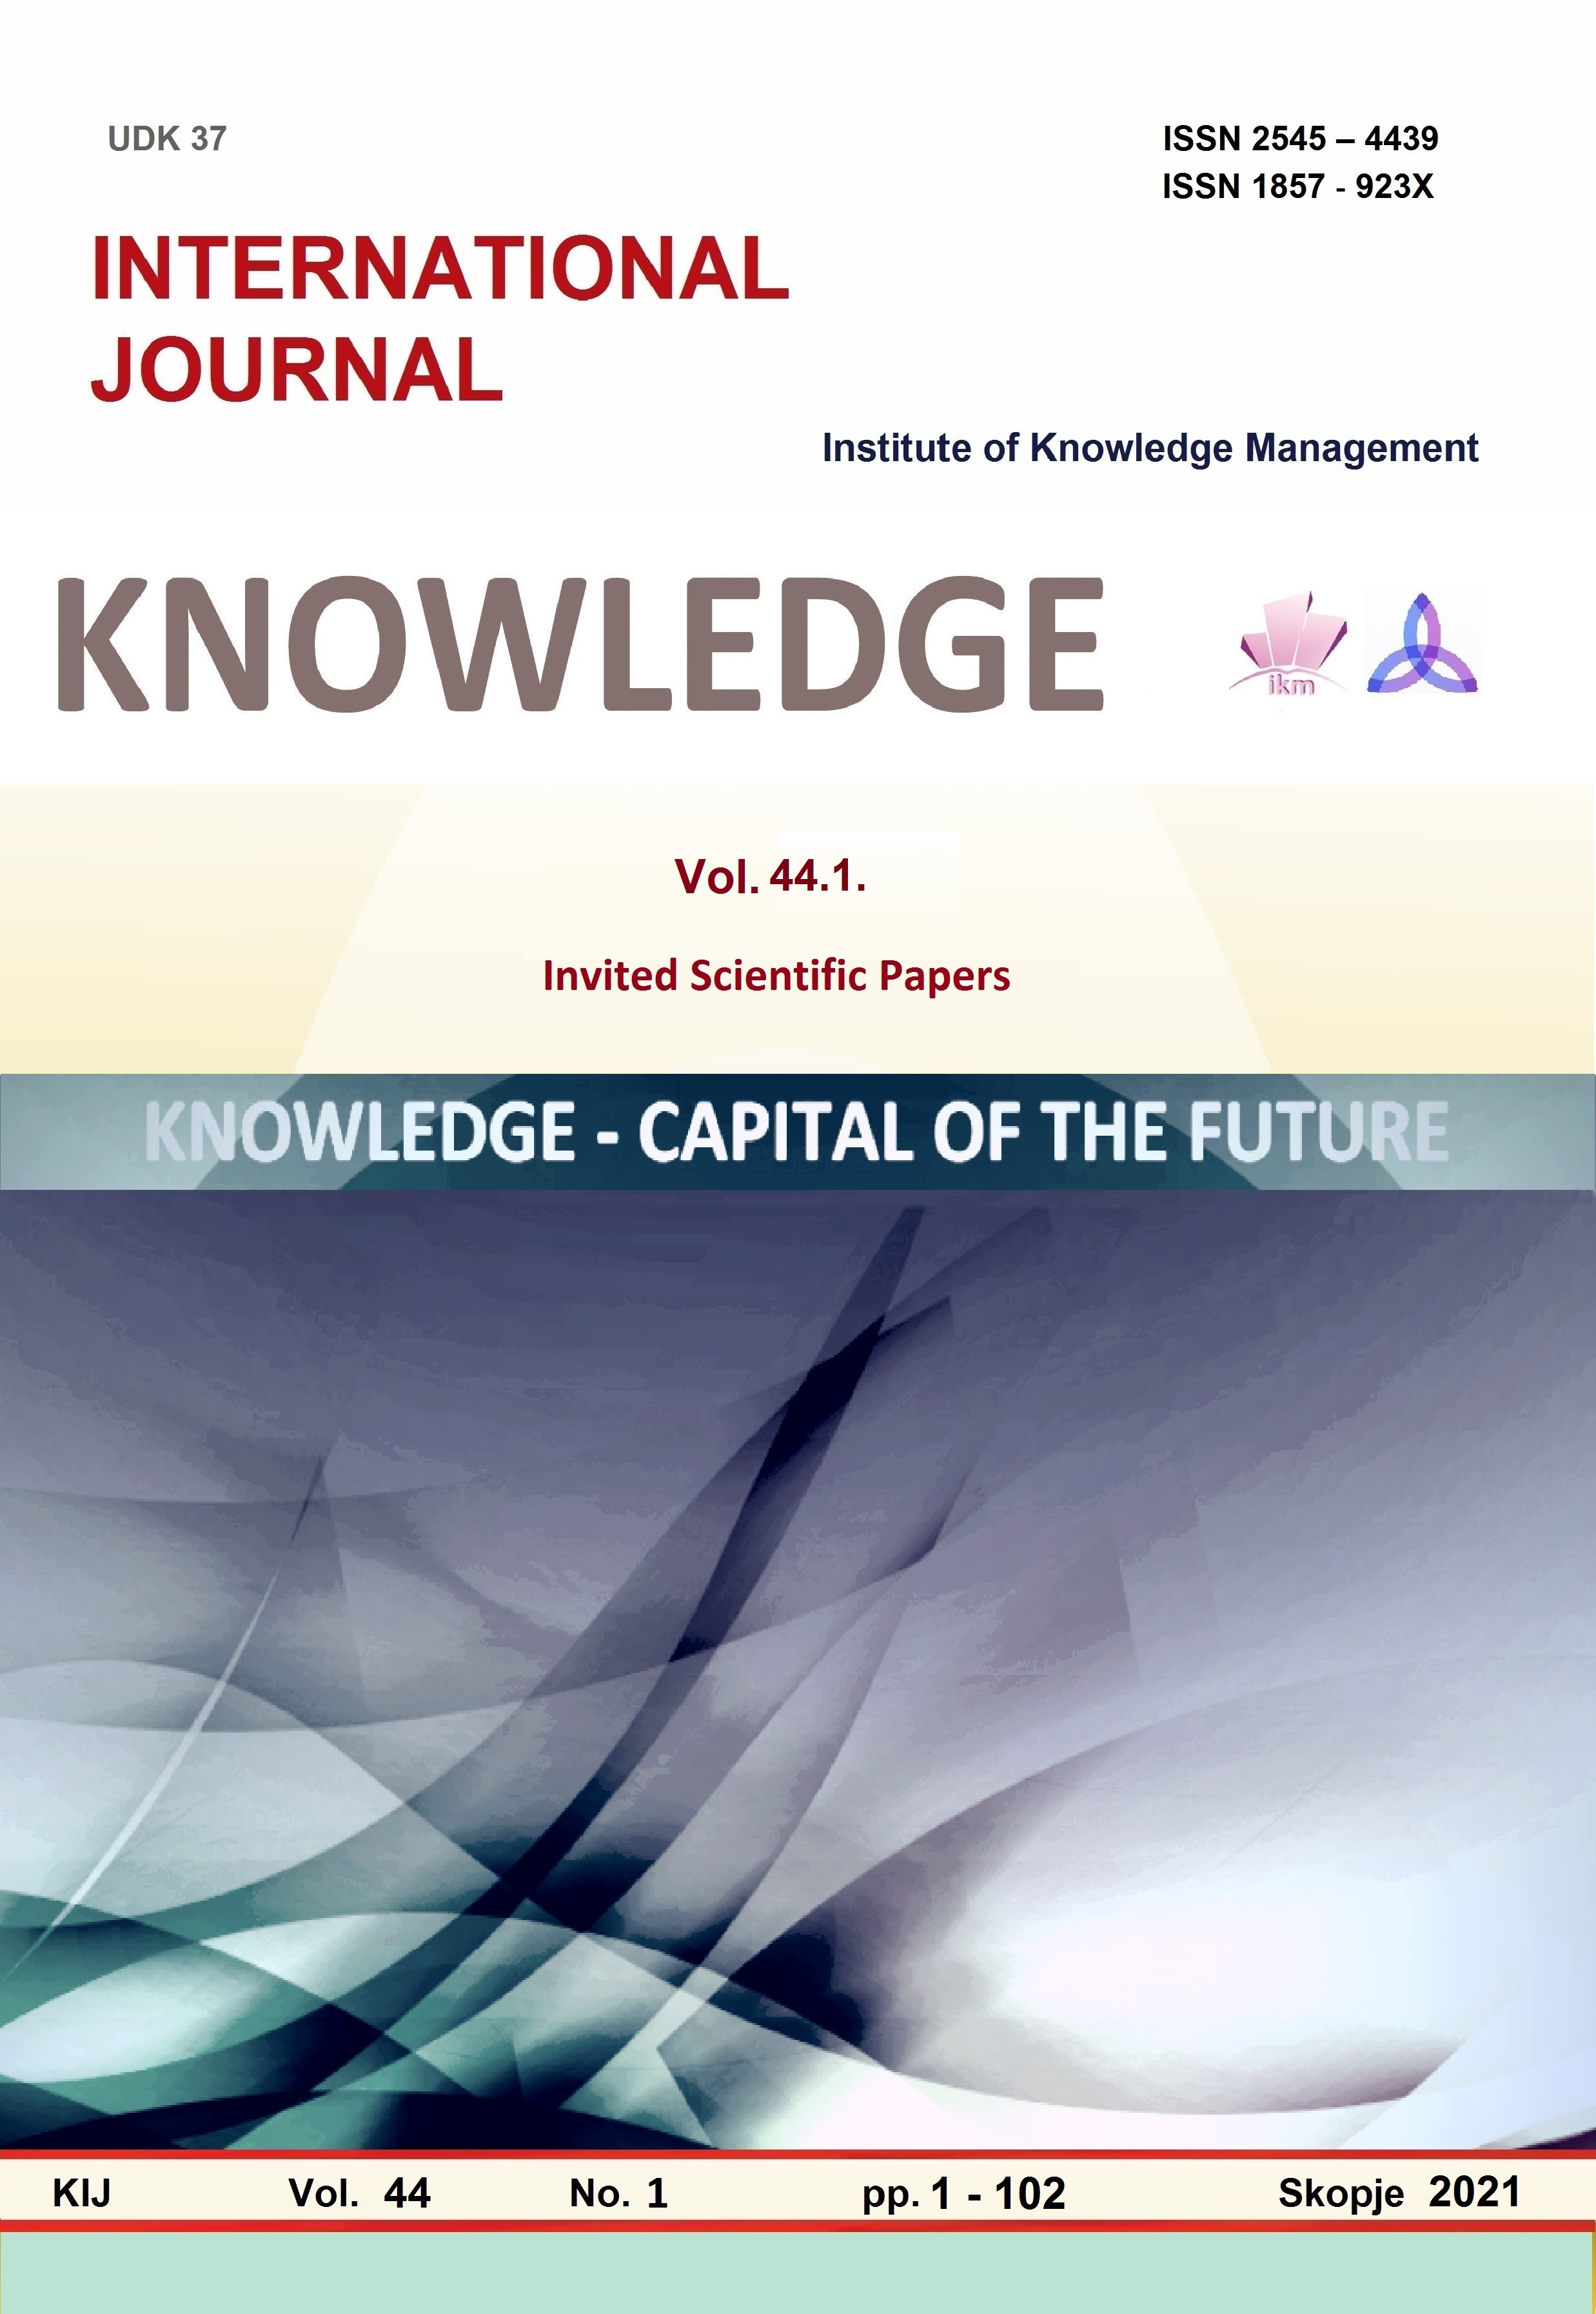 					View Vol. 44 No. 1 (2021): Knowledge - Capital Of The Future
				